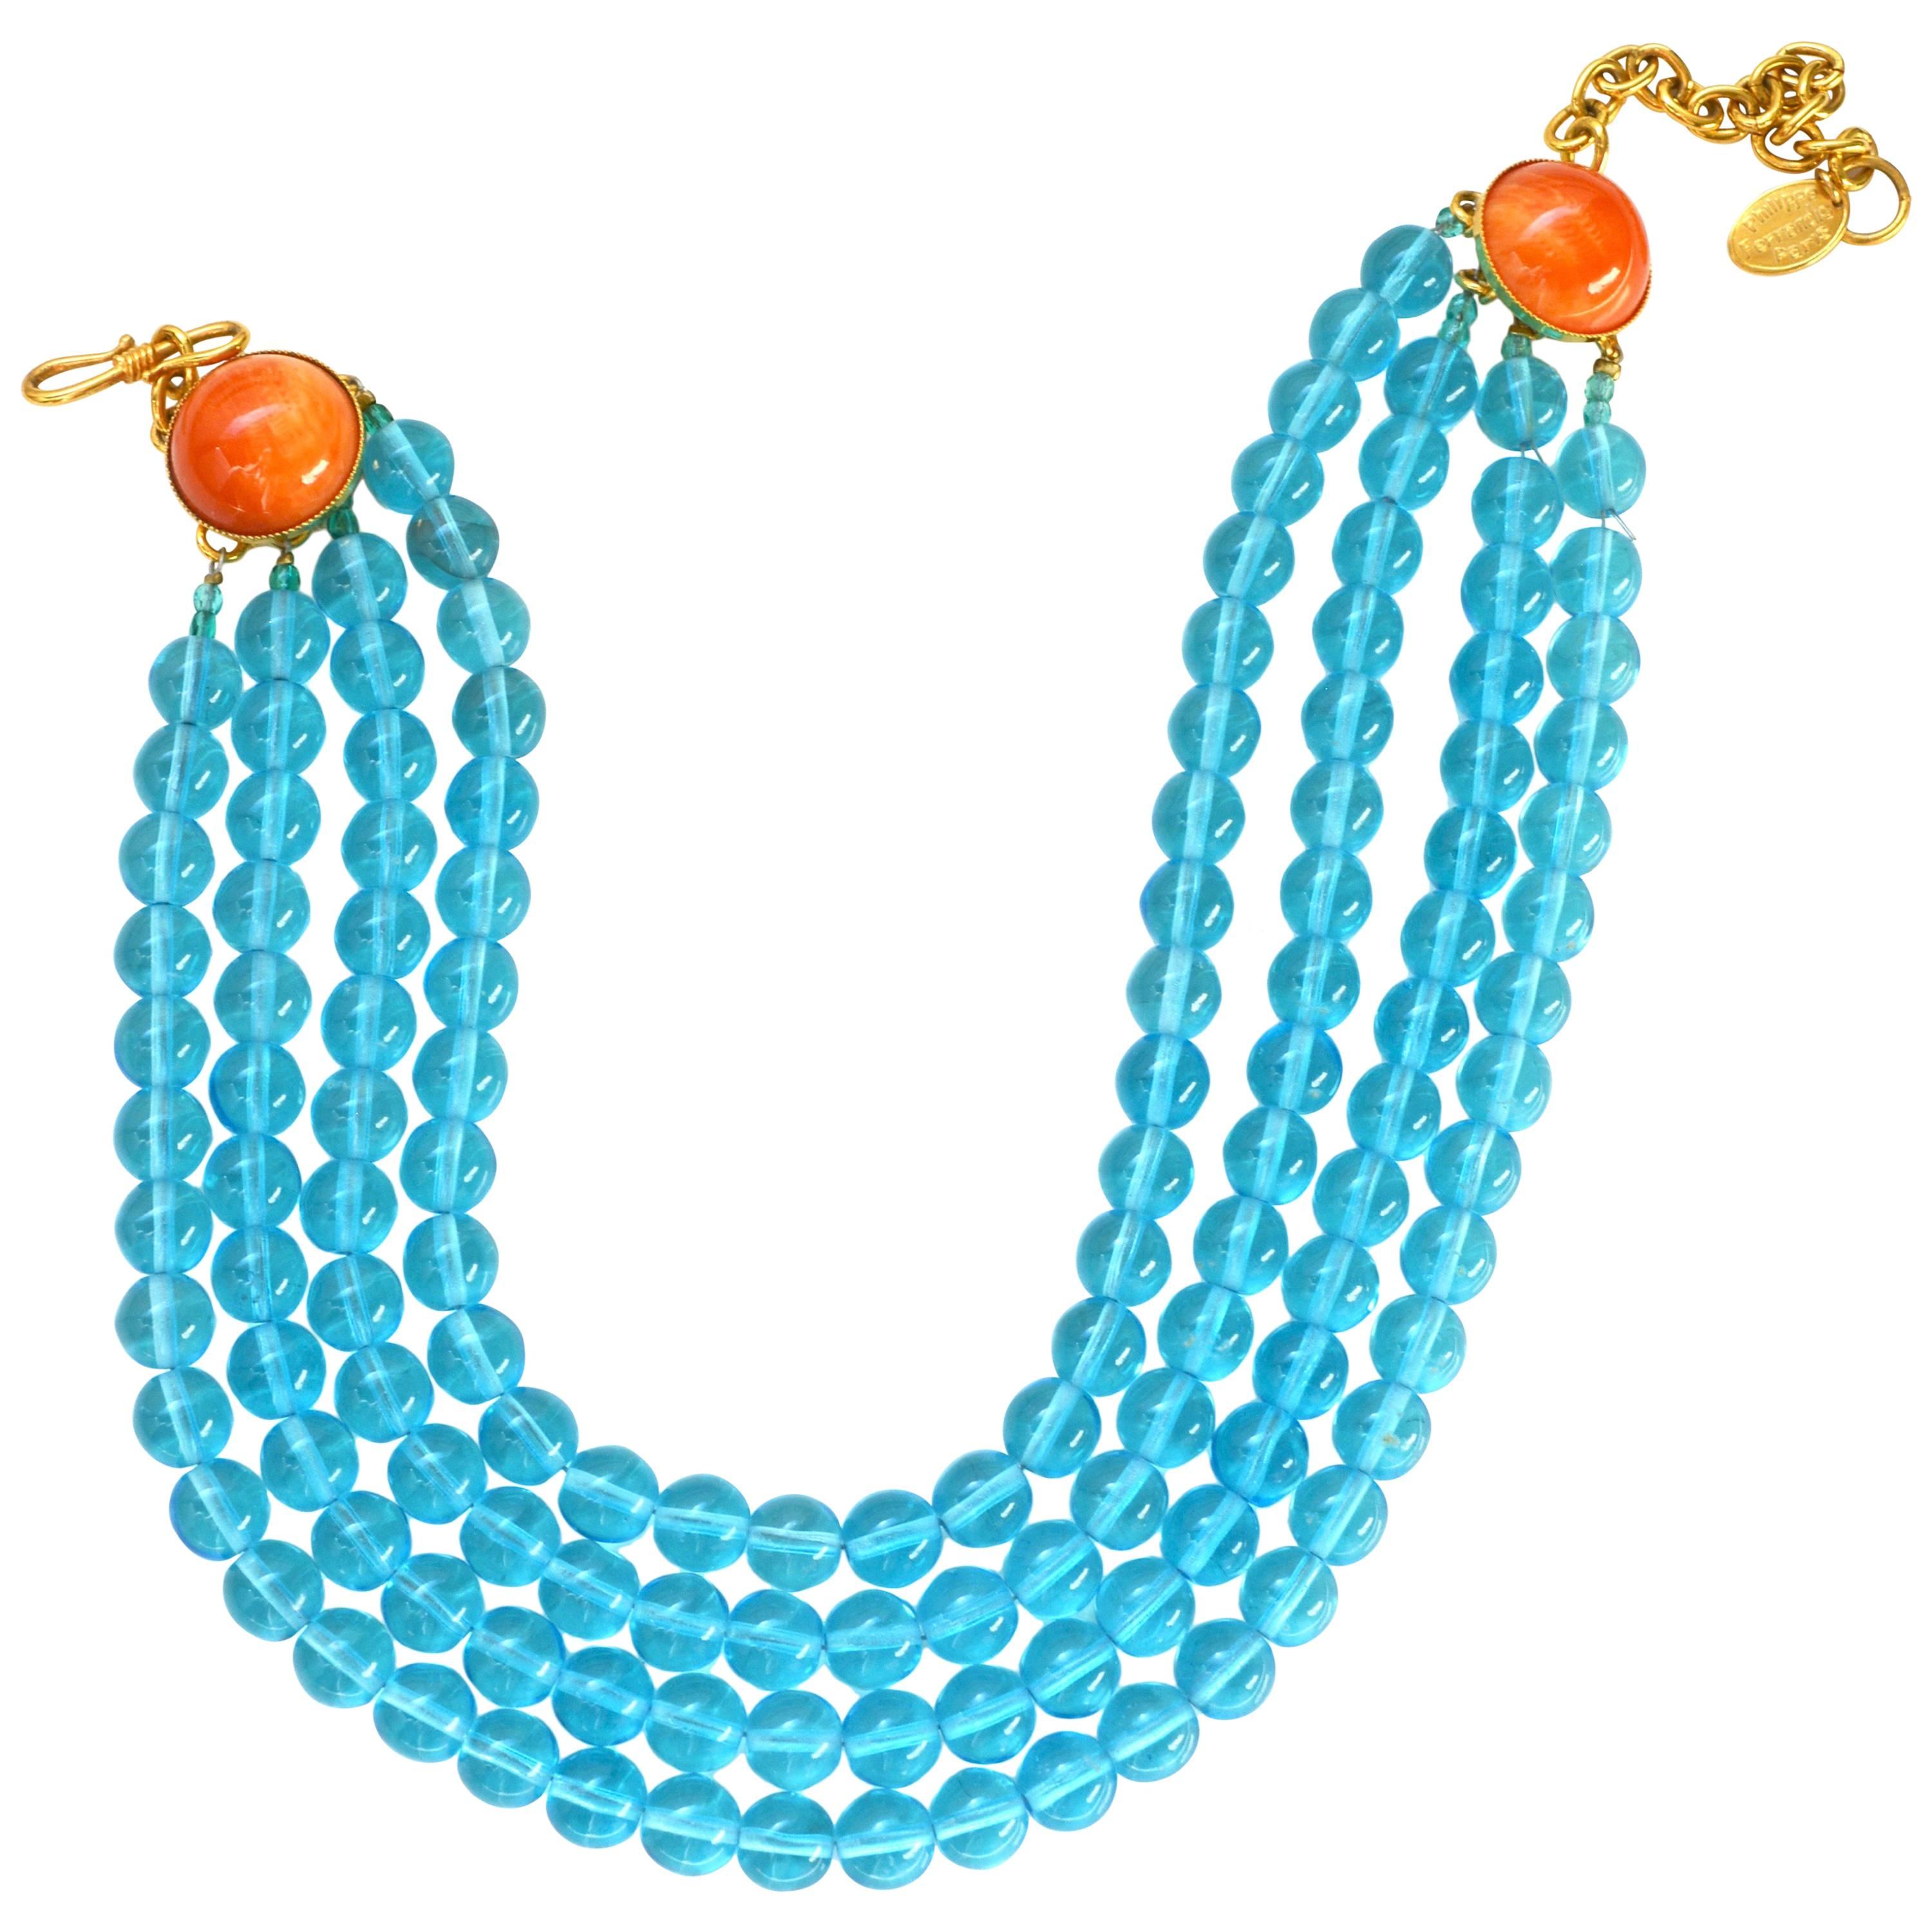 Philippe Ferrandis Paris Turquoise and Coral Collar For Sale